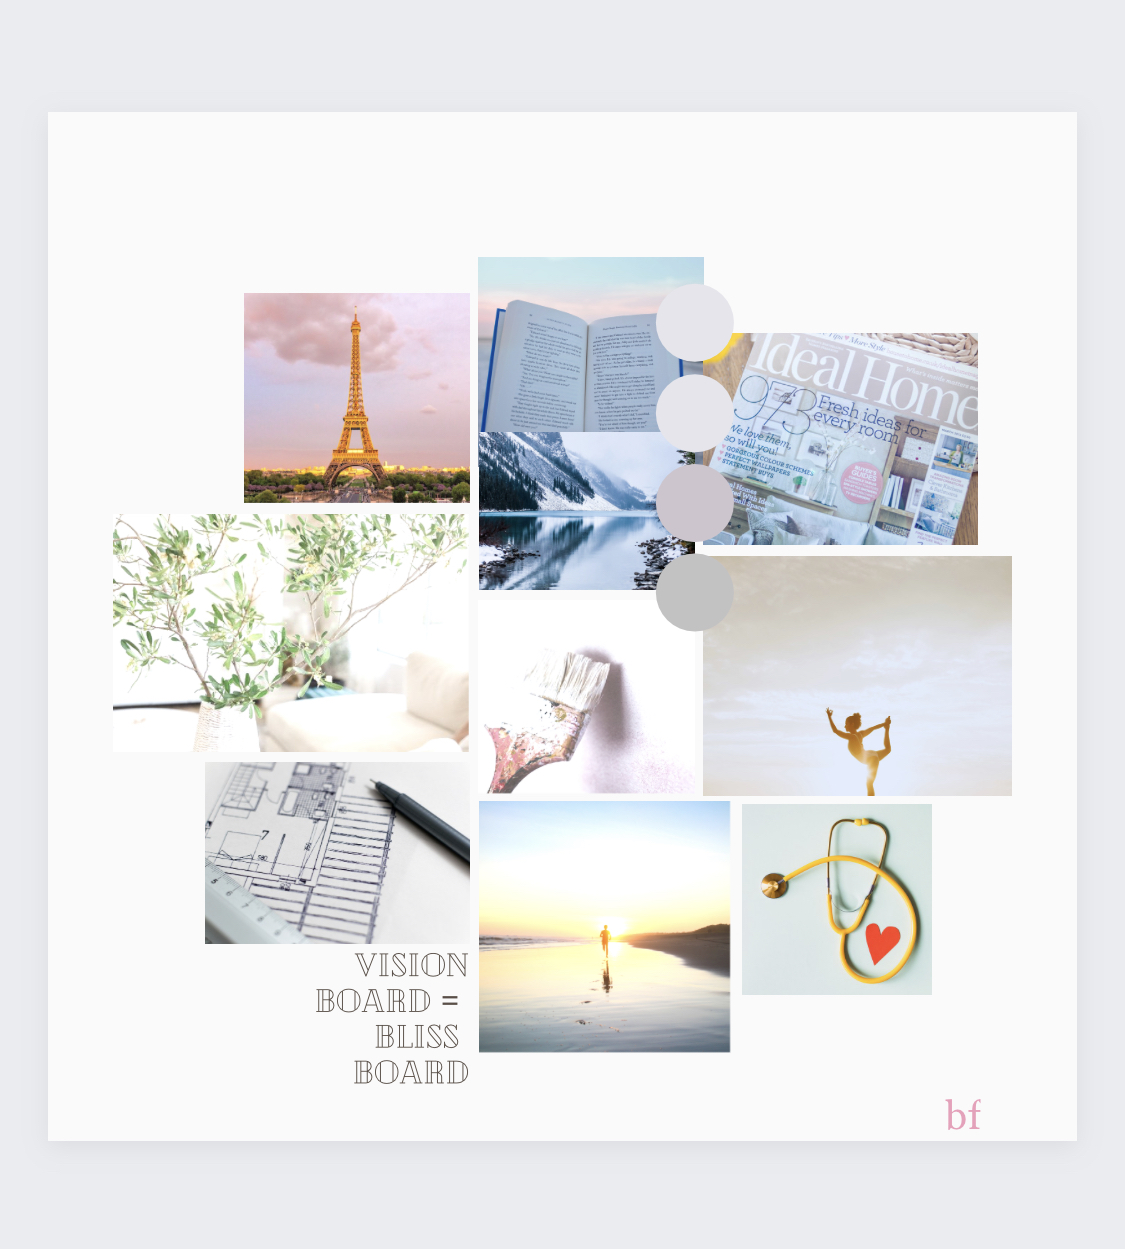 How To Design Your Life And Home Now With 5 Simple Vision Board Ideas